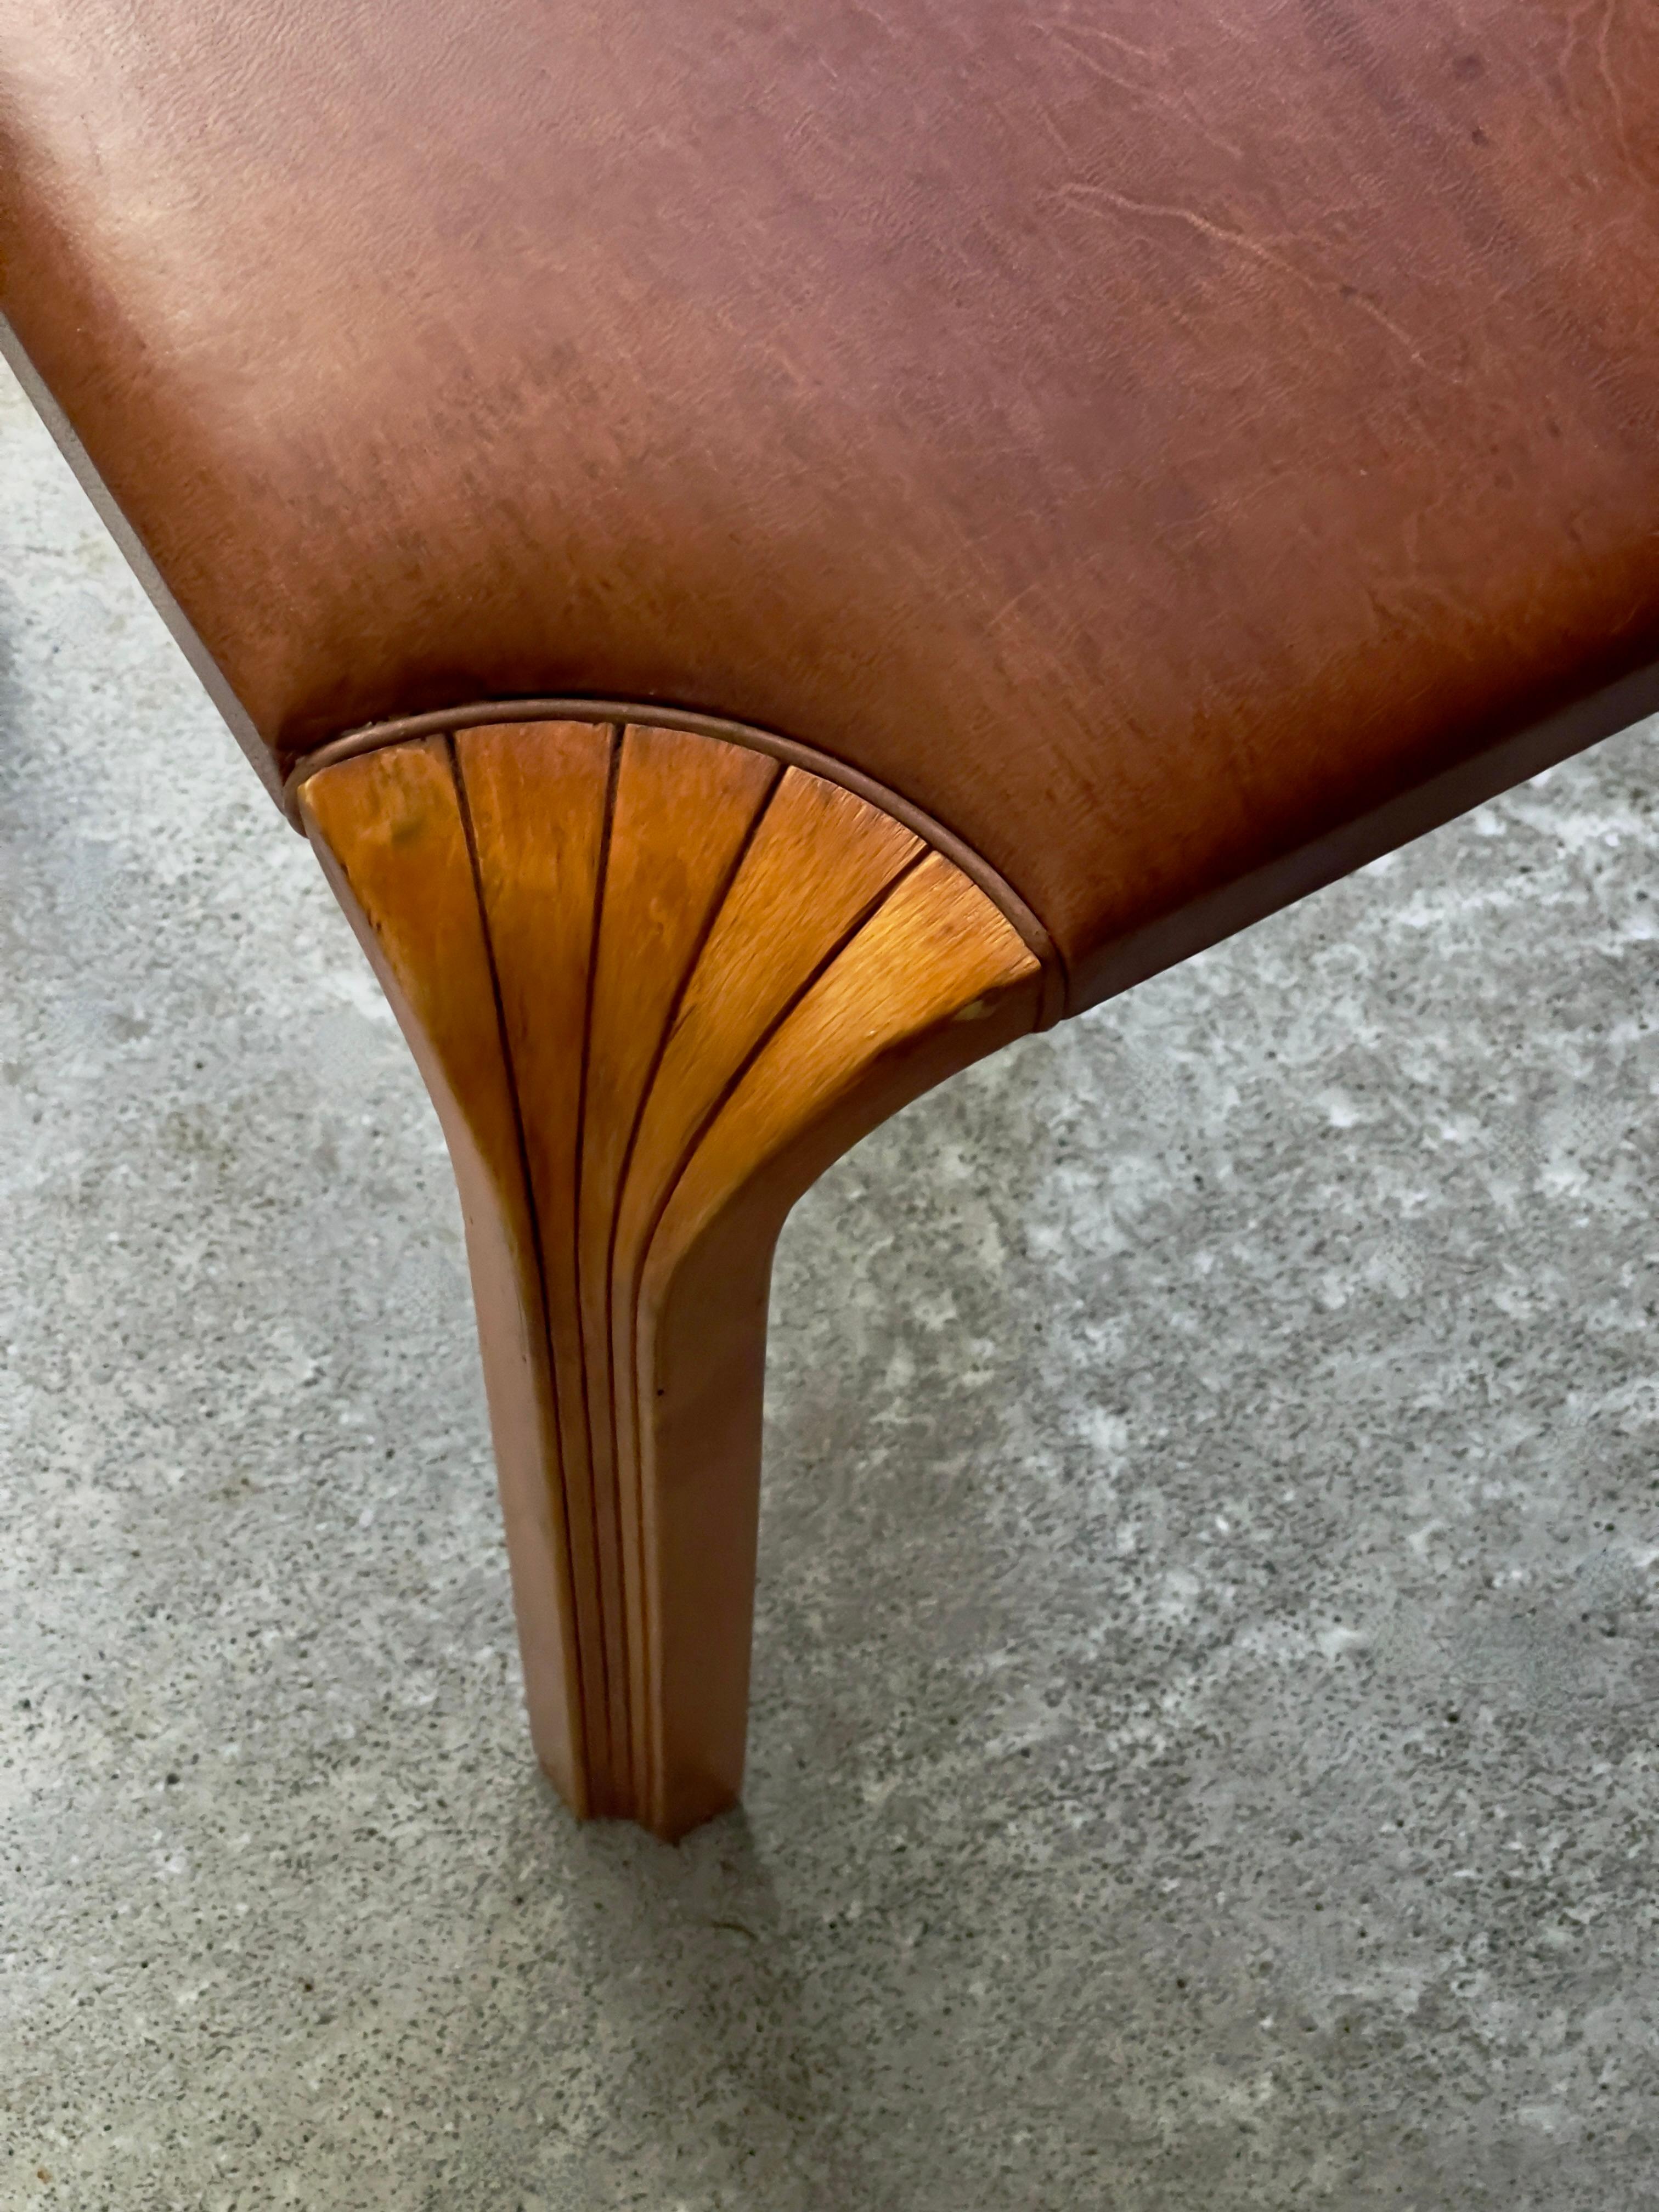 Presenting the 1954 Alvar Aalto stool model X601 in a super rich patinated birch upholstered in premium reddish brown Niger goat leather. Produced by Artek in 1960s. 

(A matching stool Model X602 is available in other listing)

The Alvar Aalto